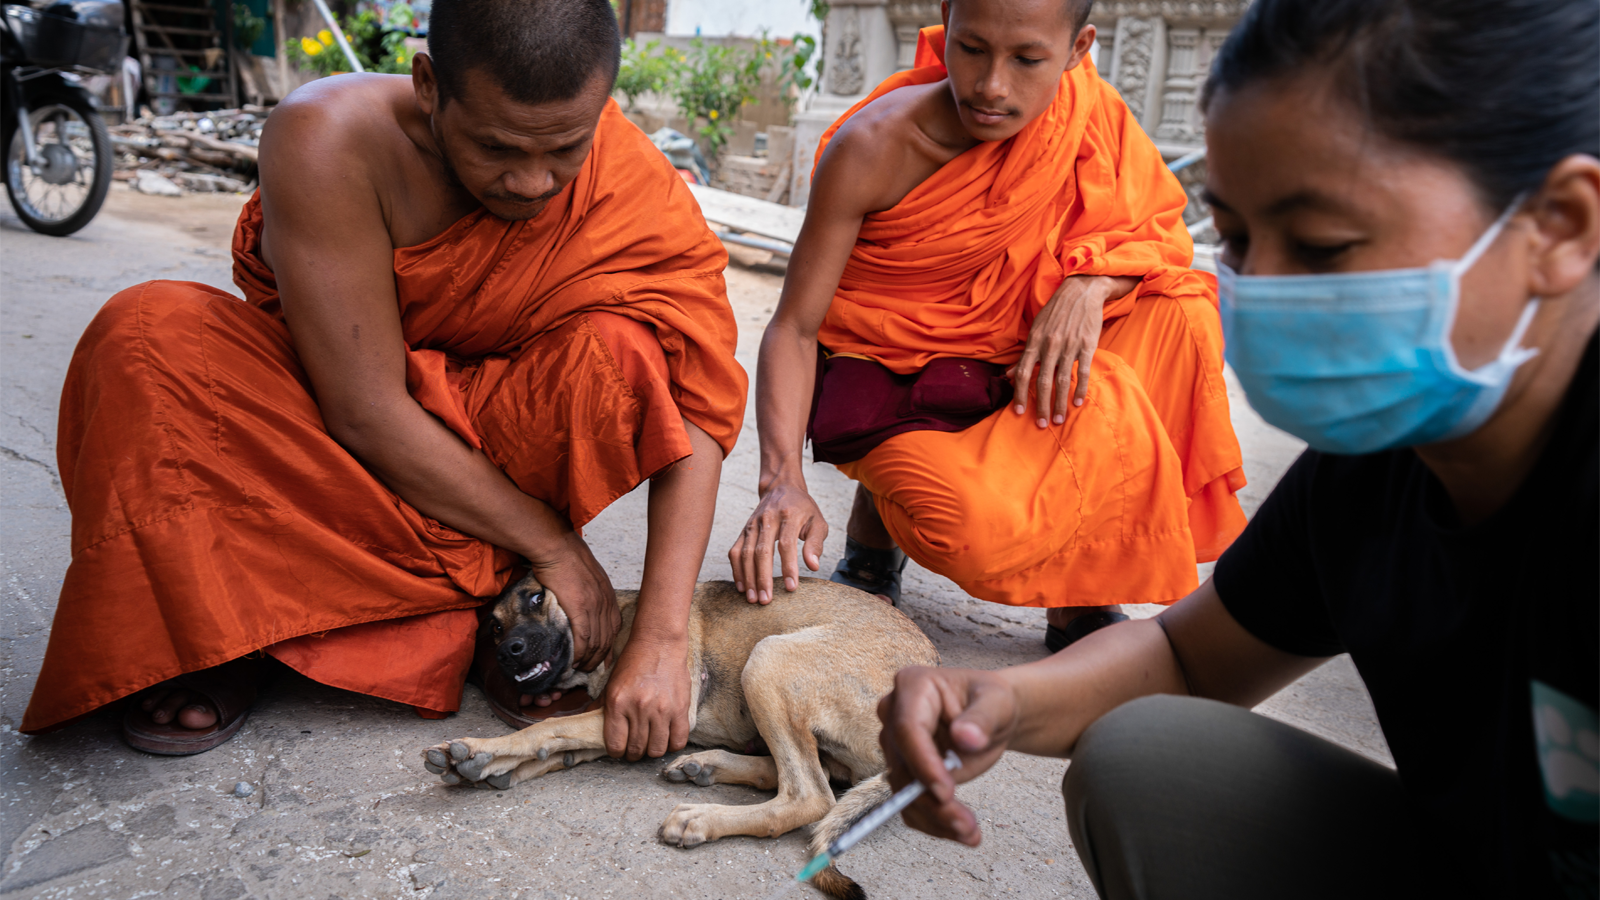 Two Buddhist monks wearing orange robes squat down and hold down a small tan dog while a kneeling woman holds a syringe preparing to vaccinate the dog for rabies. Andy Ball